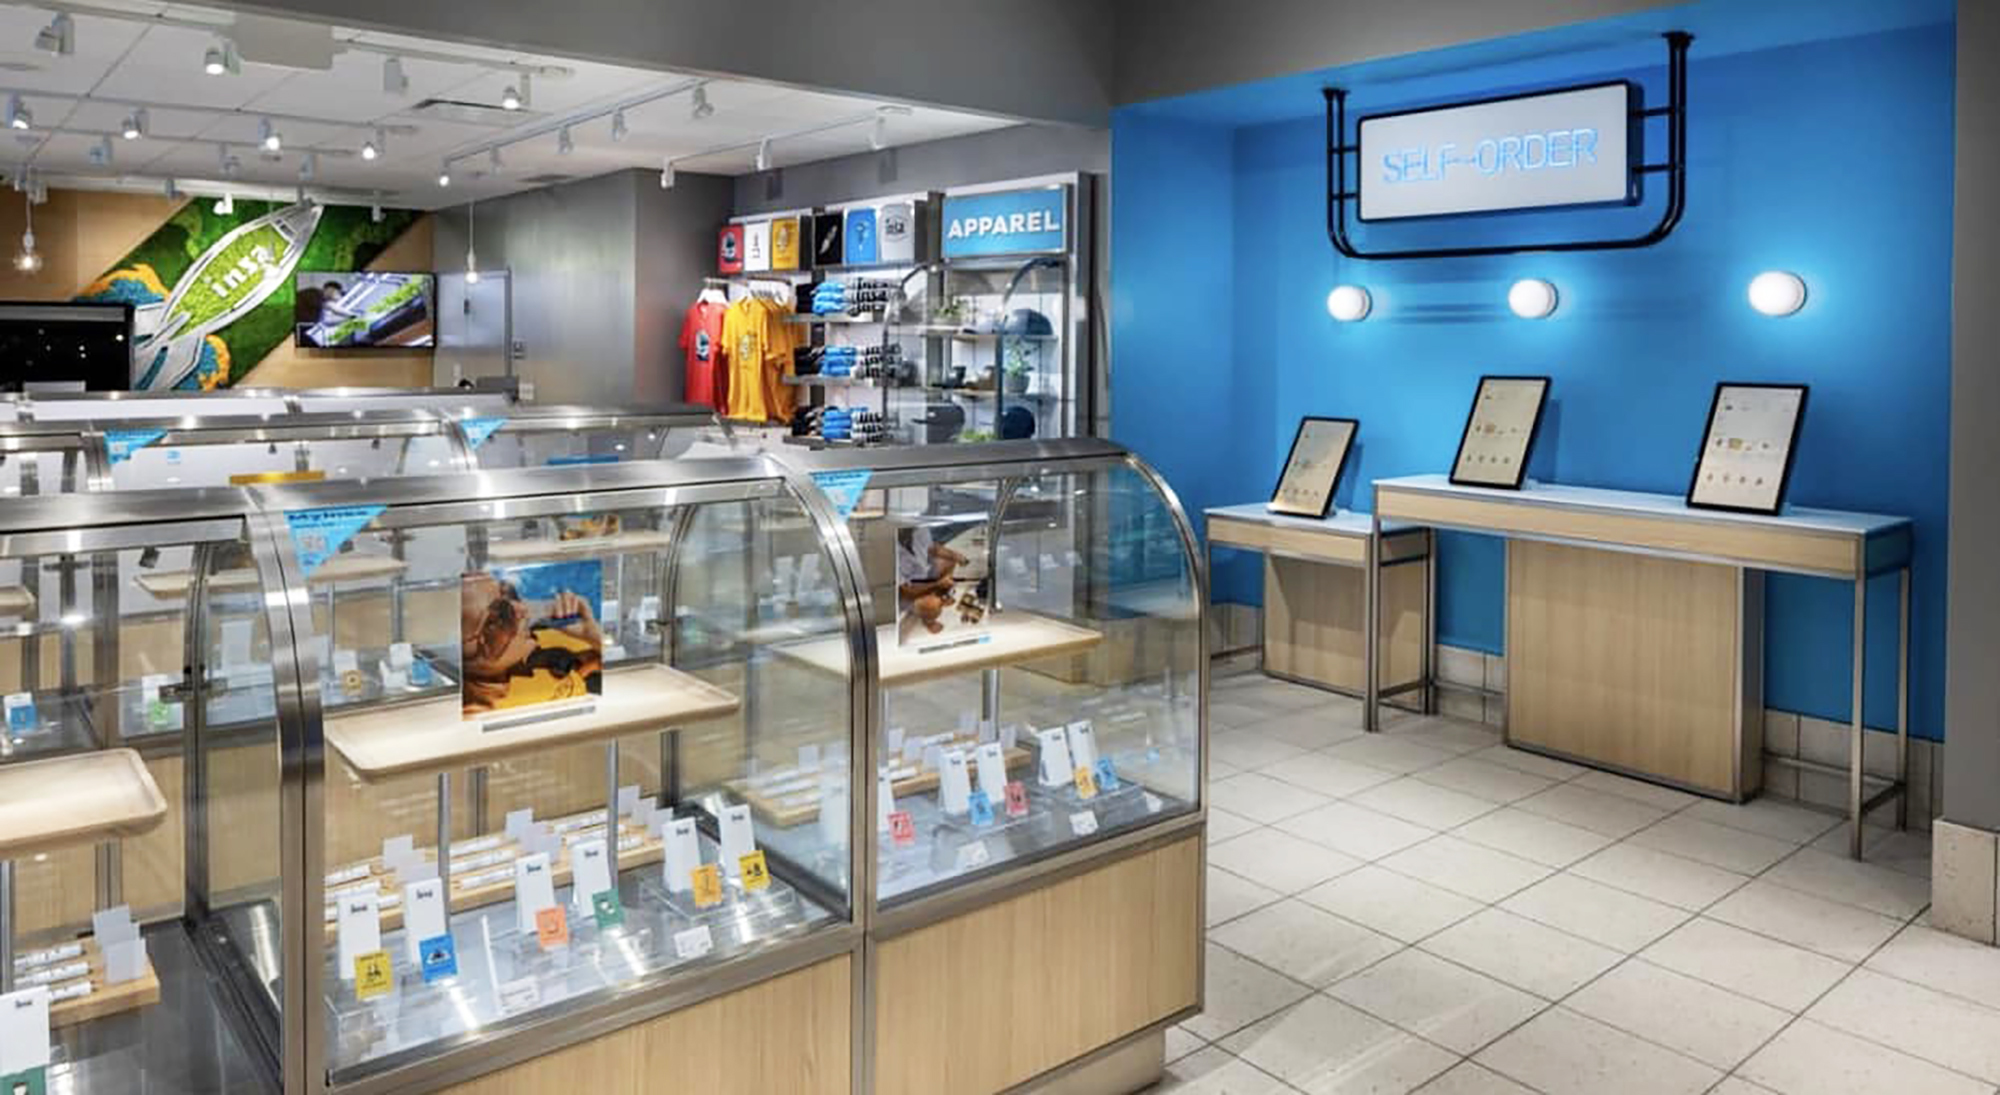 Inside the Insa dispensary in Tampa. “Displays will be on the retail floor so customers can directly engage with products to better learn about the ingredients, formats and benefits,” it says.